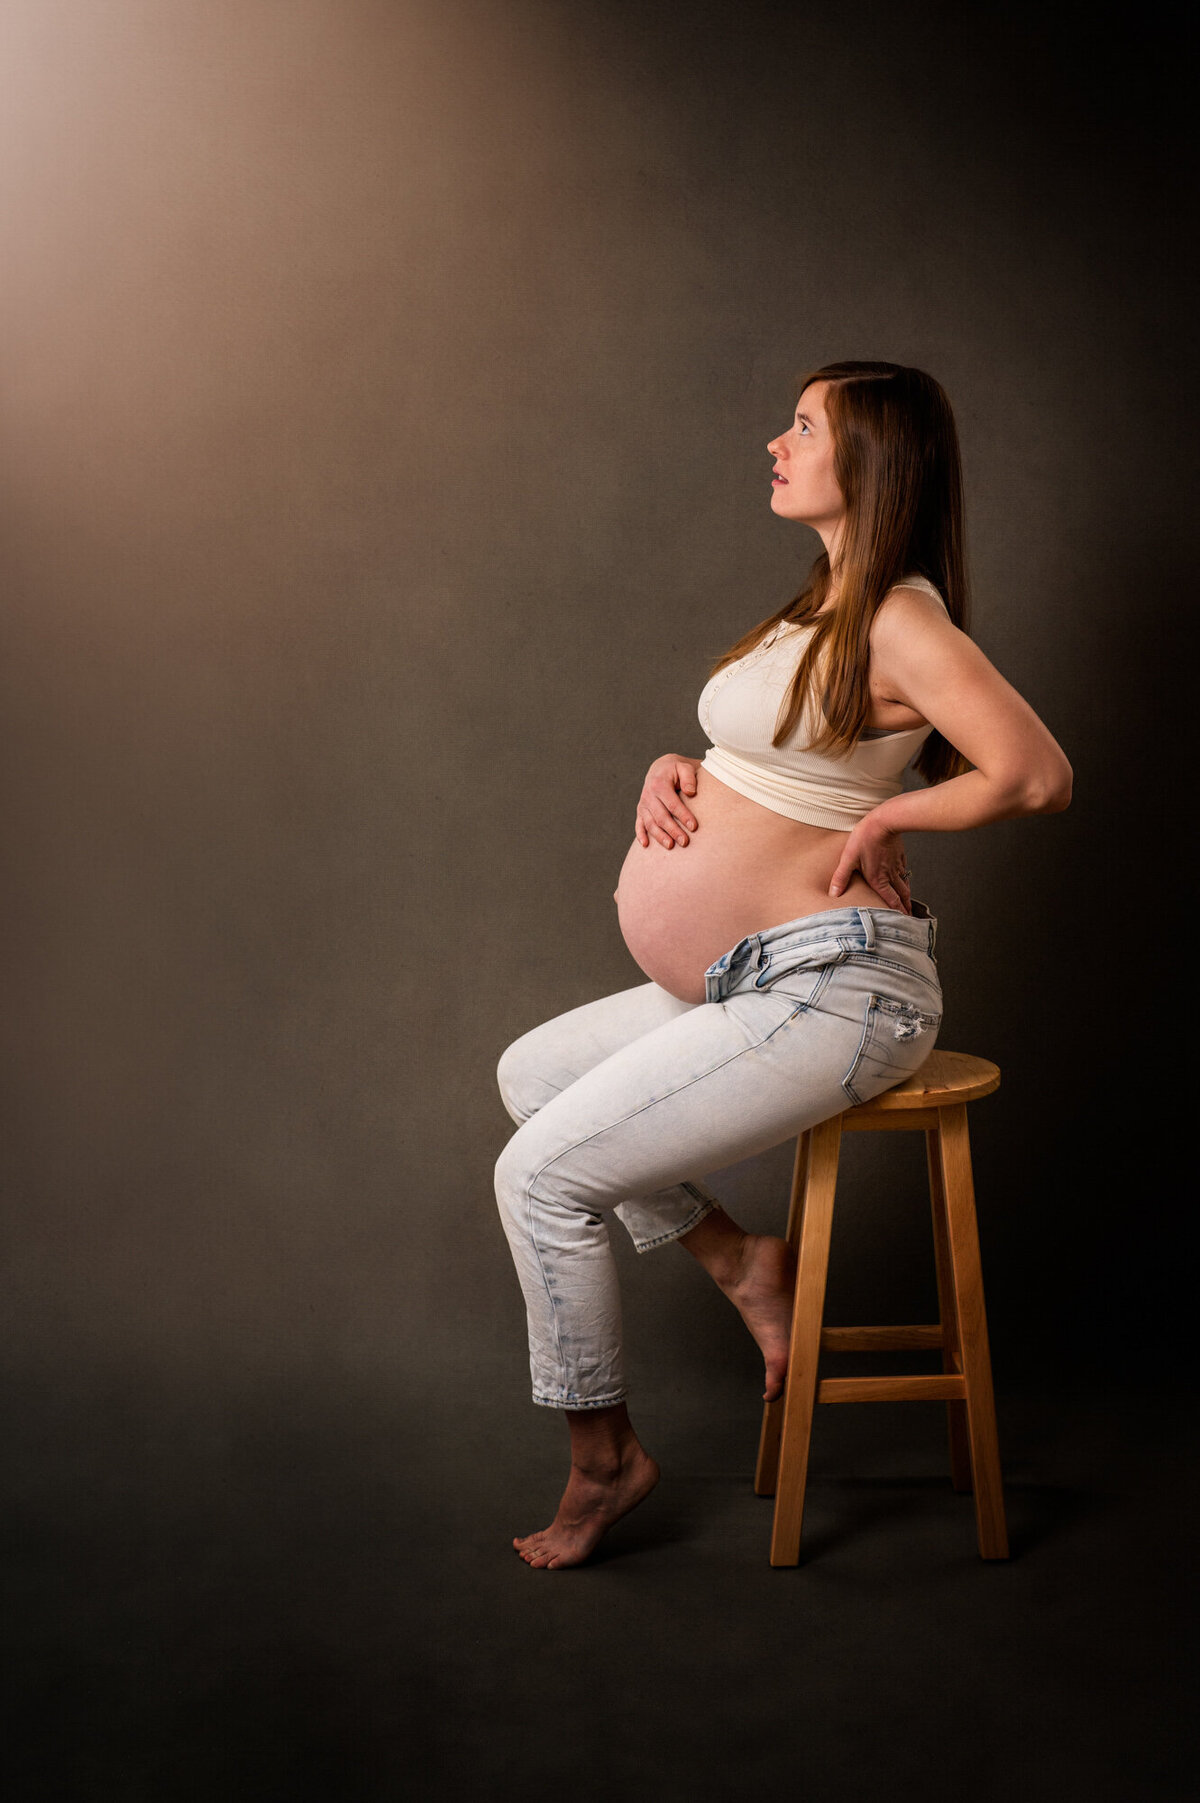 A beautiful mama to be sits on a stool and cradles her bump while staring at the light above her